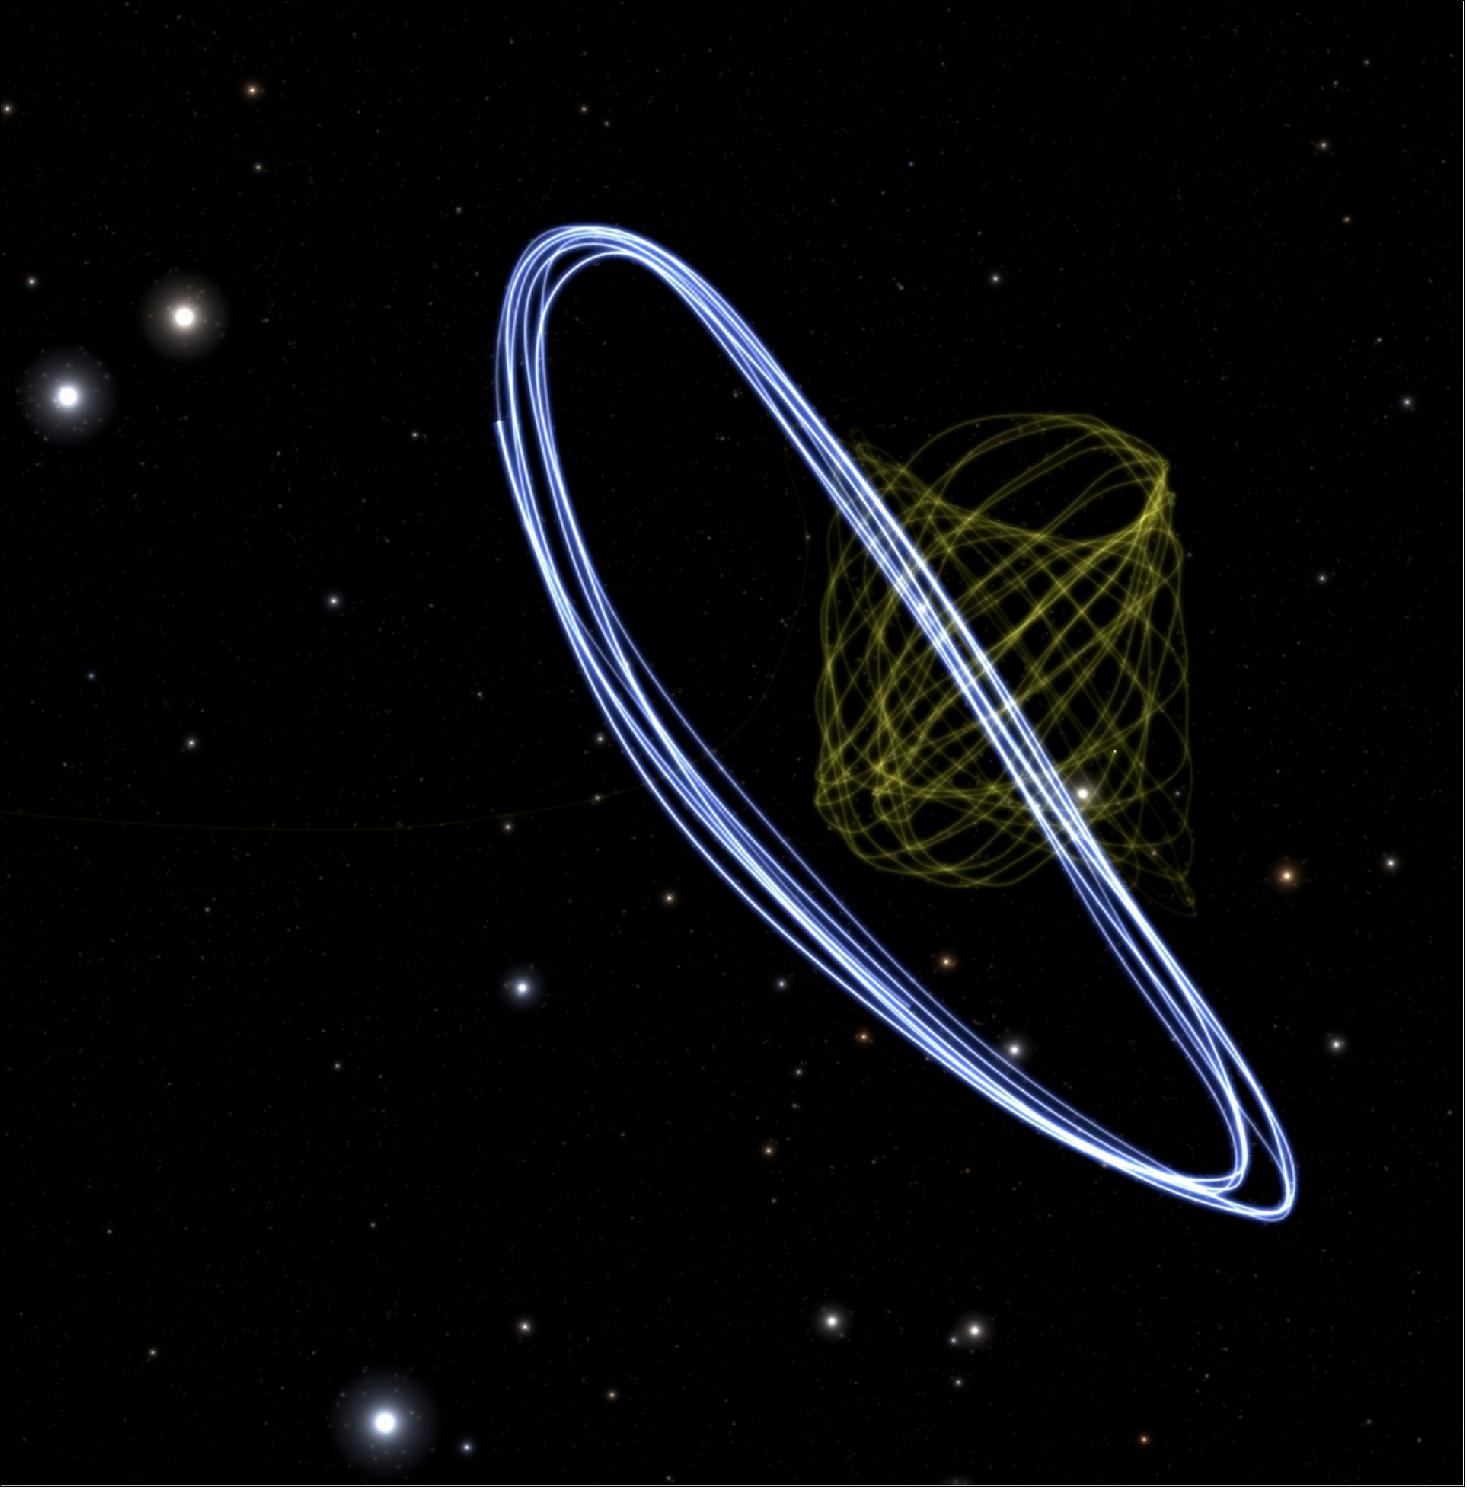 Figure 33: Gaia orbits the second Lagrange Point (L2) in a Lissajous orbit. The James Webb Space Telescope orbits L2 in a halo orbit. The telescopes are between 400,000 and 1,100,000 km apart, depending on where they are in their respective orbits. This image shows the relative sizes and locations of the Gaia orbit (yellow) and the Webb orbit (white). In this view Earth is located to the left, not far outside of the frame. Gaia’s Lissajous loops have L2 right in their centre, while Webb’s halo orbit loops are closer to Earth by about 100,000 km on average (image credit: ESA/Gaia/DPAC; CC BY-SA 3.0 IGO)